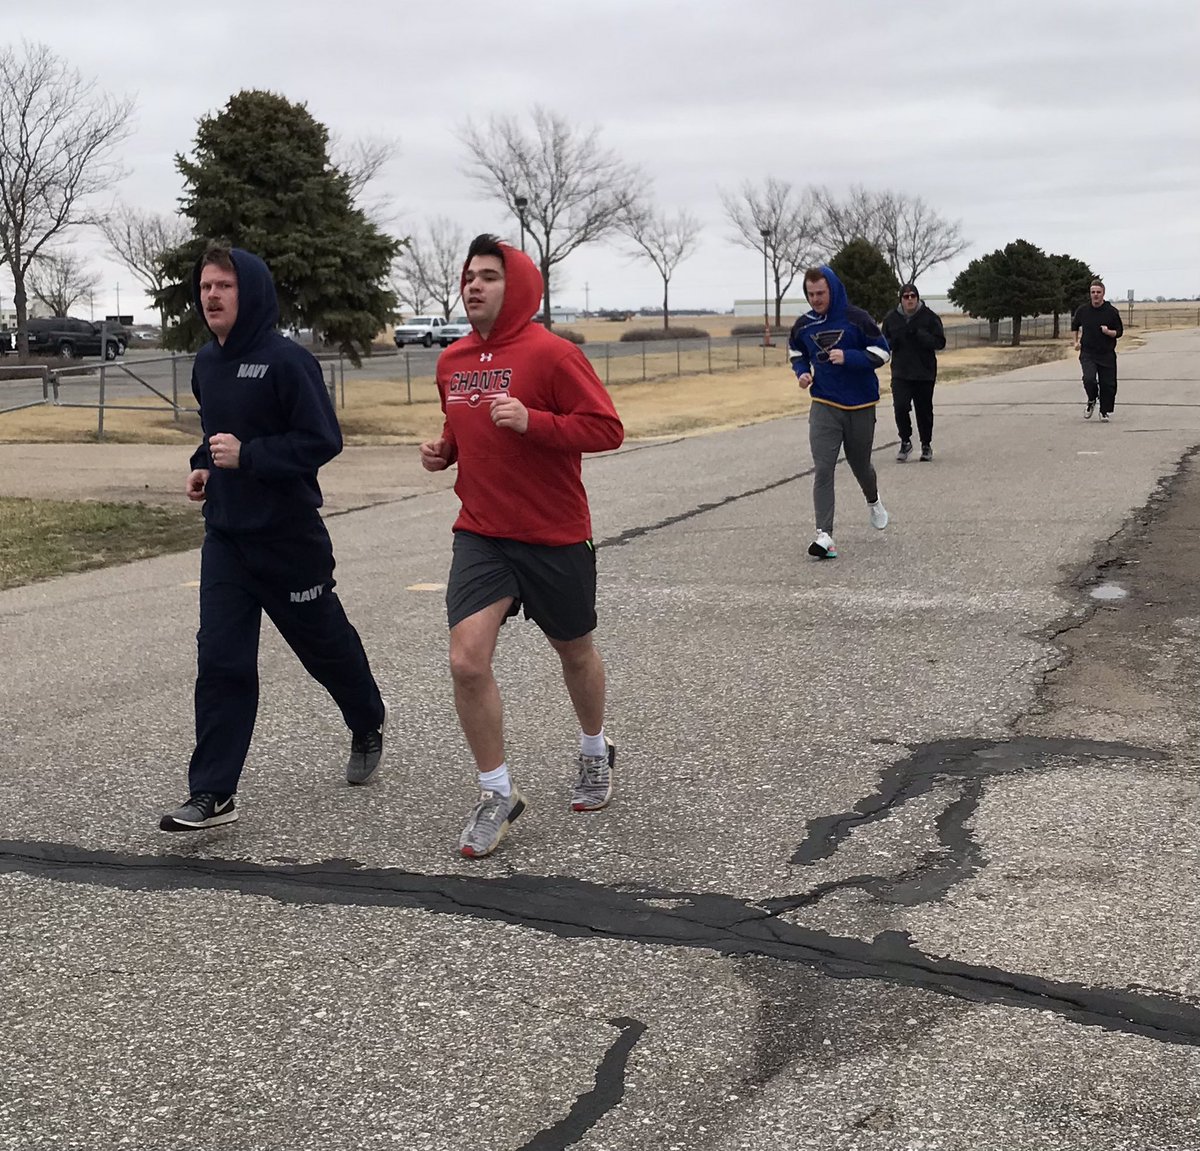 Brisk spring weather doesn’t stop the application process, as @NSP_TA was happy to host a group of applicants for physical assessments today.  Good luck on the rest of the process.  #JoinNSP